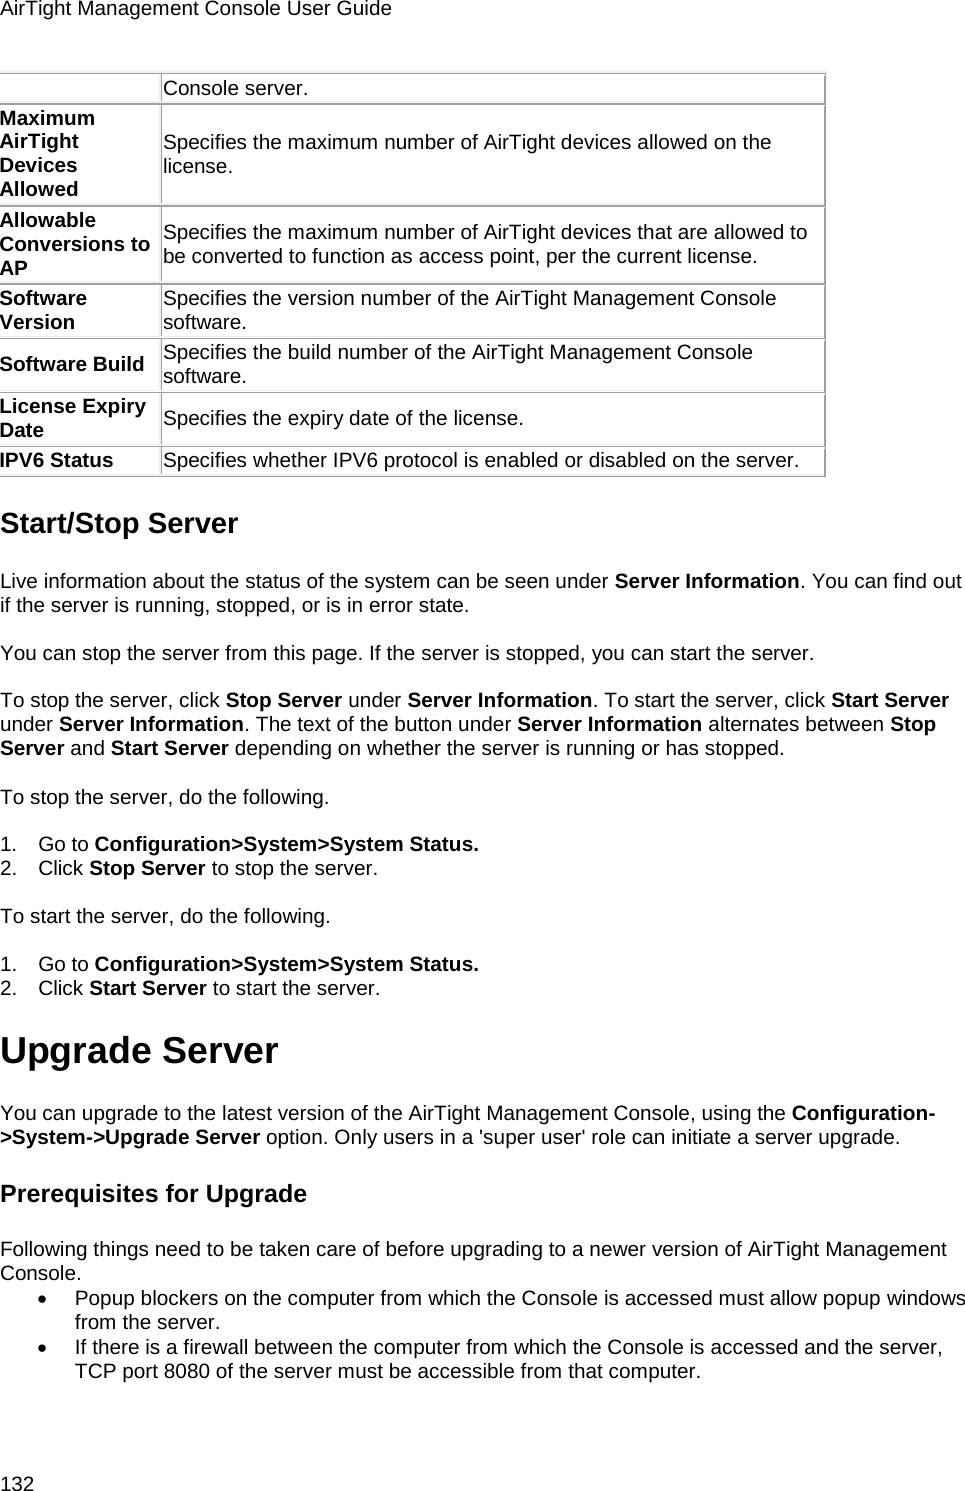 AirTight Management Console User Guide 132 Console server. Maximum AirTight Devices Allowed Specifies the maximum number of AirTight devices allowed on the license. Allowable Conversions to AP Specifies the maximum number of AirTight devices that are allowed to be converted to function as access point, per the current license. Software Version Specifies the version number of the AirTight Management Console software. Software Build Specifies the build number of the AirTight Management Console software. License Expiry Date Specifies the expiry date of the license. IPV6 Status Specifies whether IPV6 protocol is enabled or disabled on the server. Start/Stop Server Live information about the status of the system can be seen under Server Information. You can find out if the server is running, stopped, or is in error state.    You can stop the server from this page. If the server is stopped, you can start the server.   To stop the server, click Stop Server under Server Information. To start the server, click Start Server under Server Information. The text of the button under Server Information alternates between Stop Server and Start Server depending on whether the server is running or has stopped.   To stop the server, do the following.   1.      Go to Configuration&gt;System&gt;System Status. 2.      Click Stop Server to stop the server.   To start the server, do the following.   1.      Go to Configuration&gt;System&gt;System Status. 2.      Click Start Server to start the server. Upgrade Server You can upgrade to the latest version of the AirTight Management Console, using the Configuration-&gt;System-&gt;Upgrade Server option. Only users in a &apos;super user&apos; role can initiate a server upgrade. Prerequisites for Upgrade Following things need to be taken care of before upgrading to a newer version of AirTight Management Console. • Popup blockers on the computer from which the Console is accessed must allow popup windows from the server. • If there is a firewall between the computer from which the Console is accessed and the server, TCP port 8080 of the server must be accessible from that computer.   